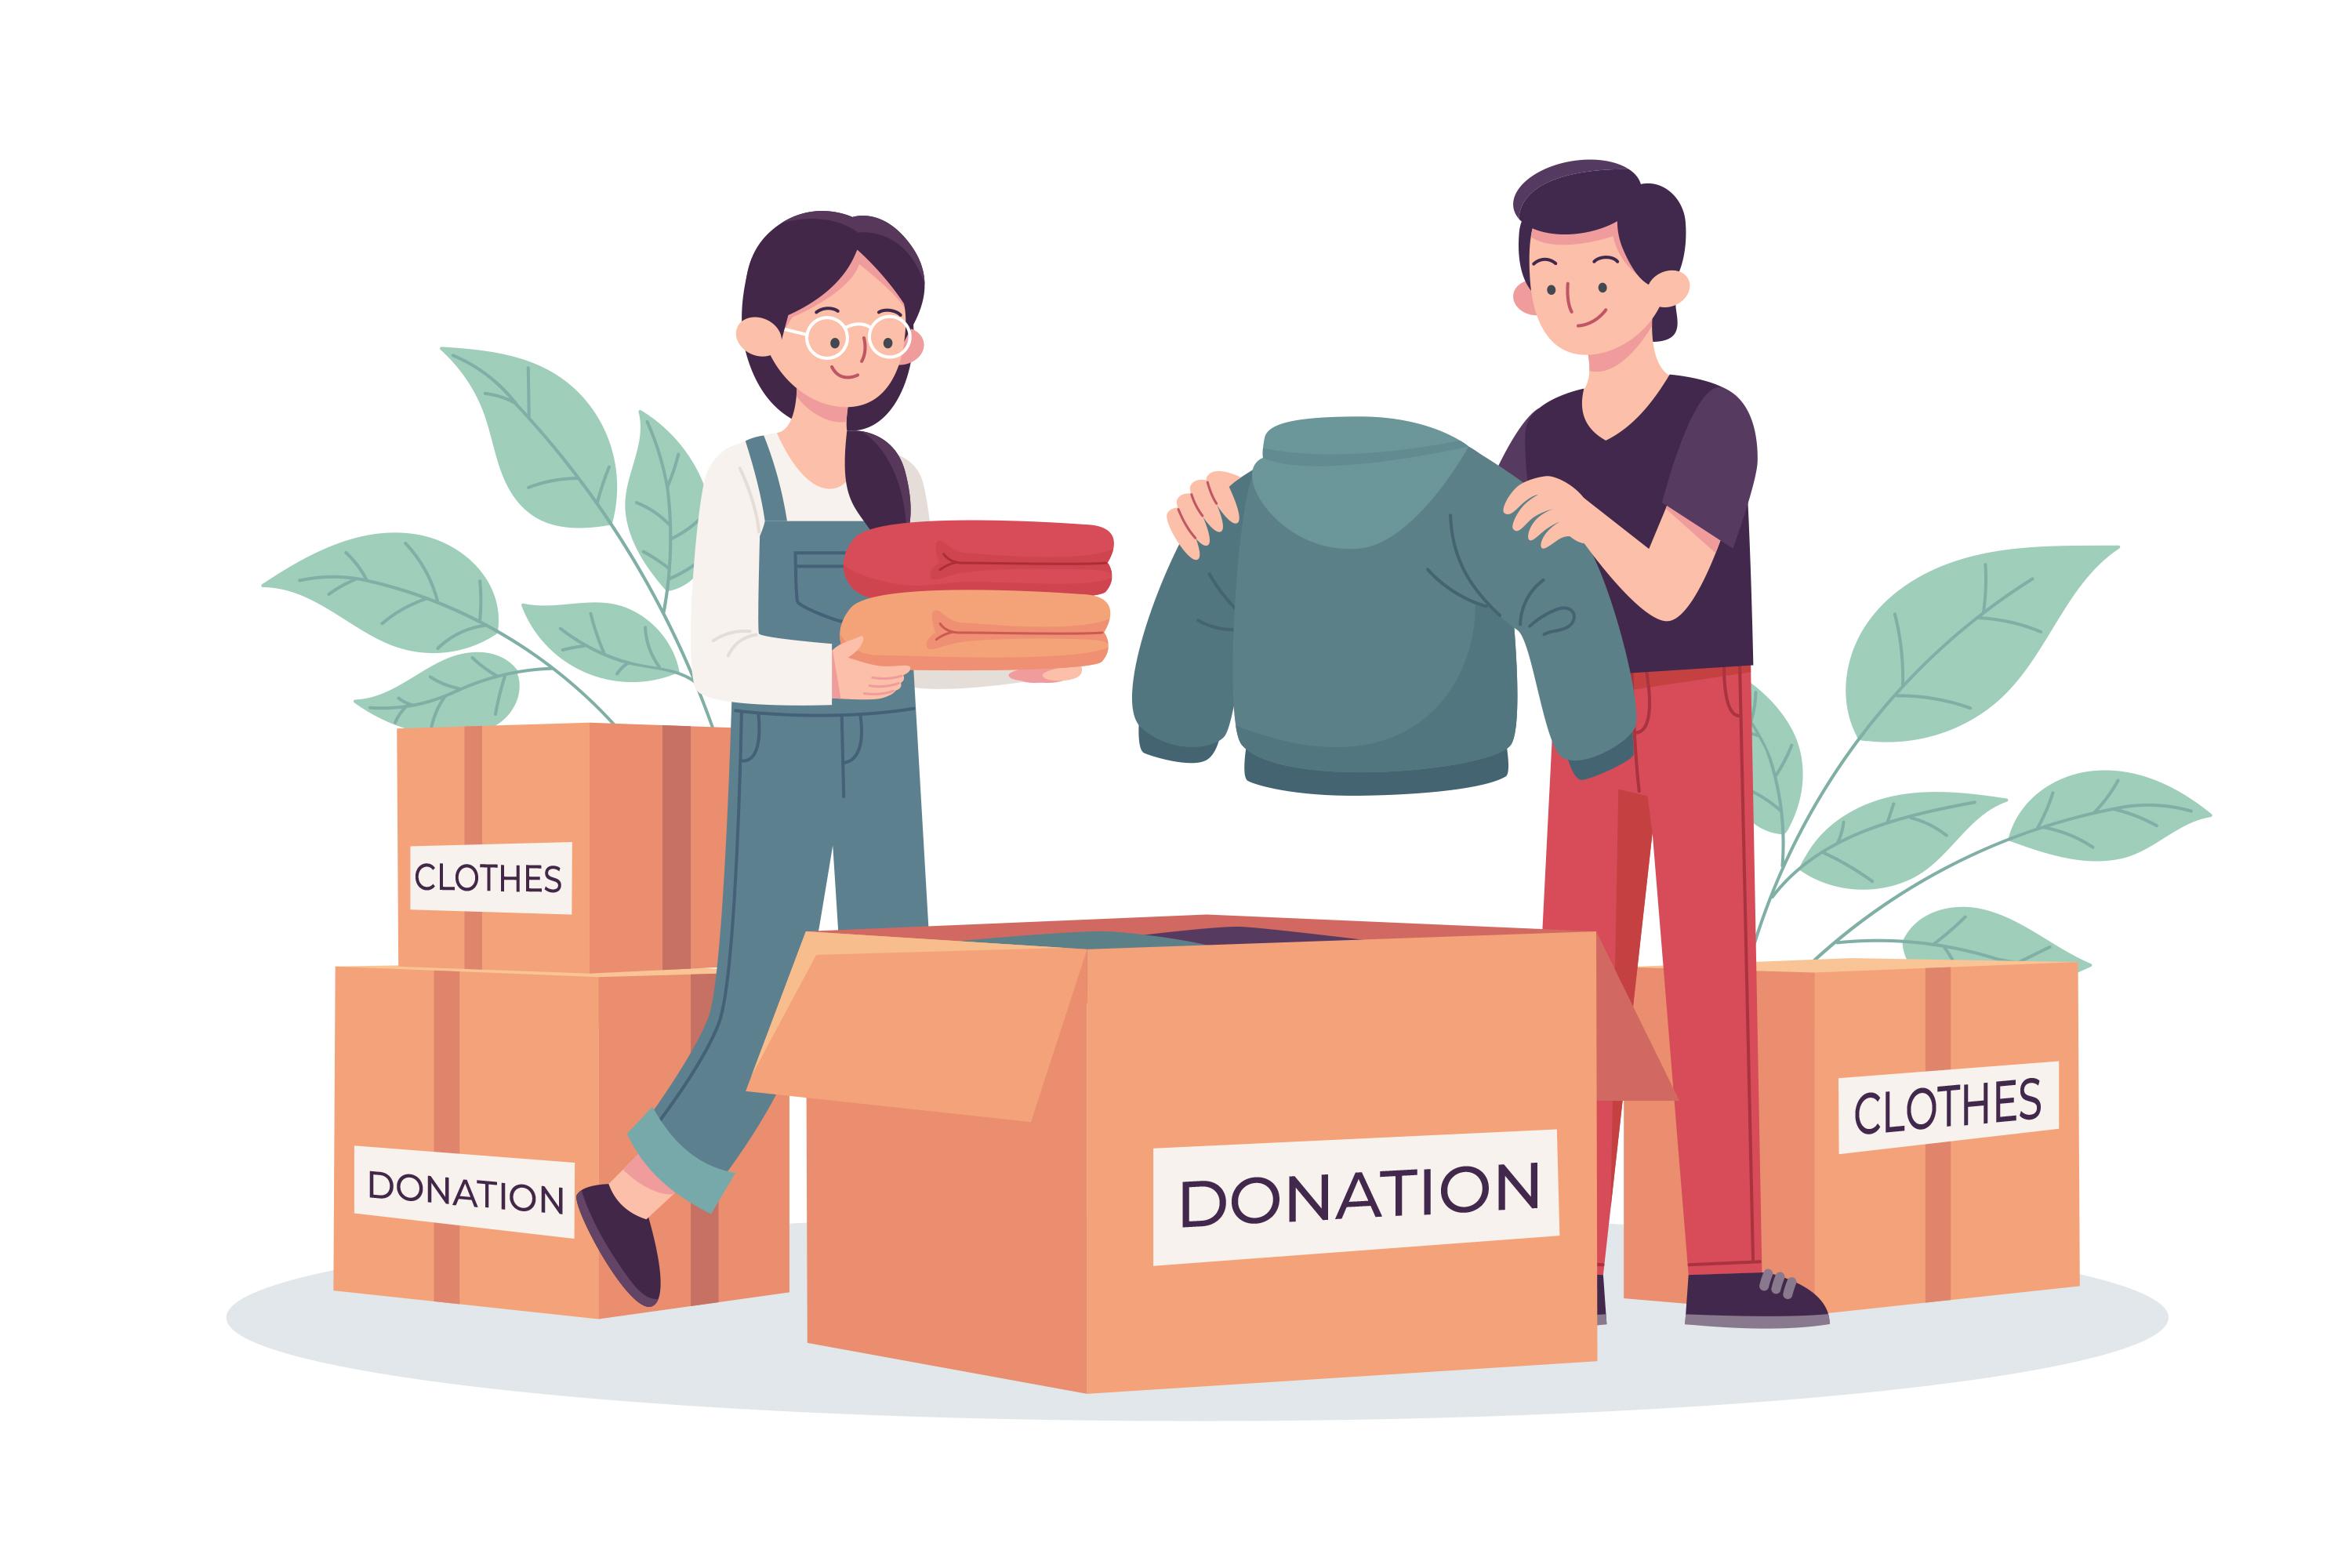 Geolife Foundation Cloths Collection Drive